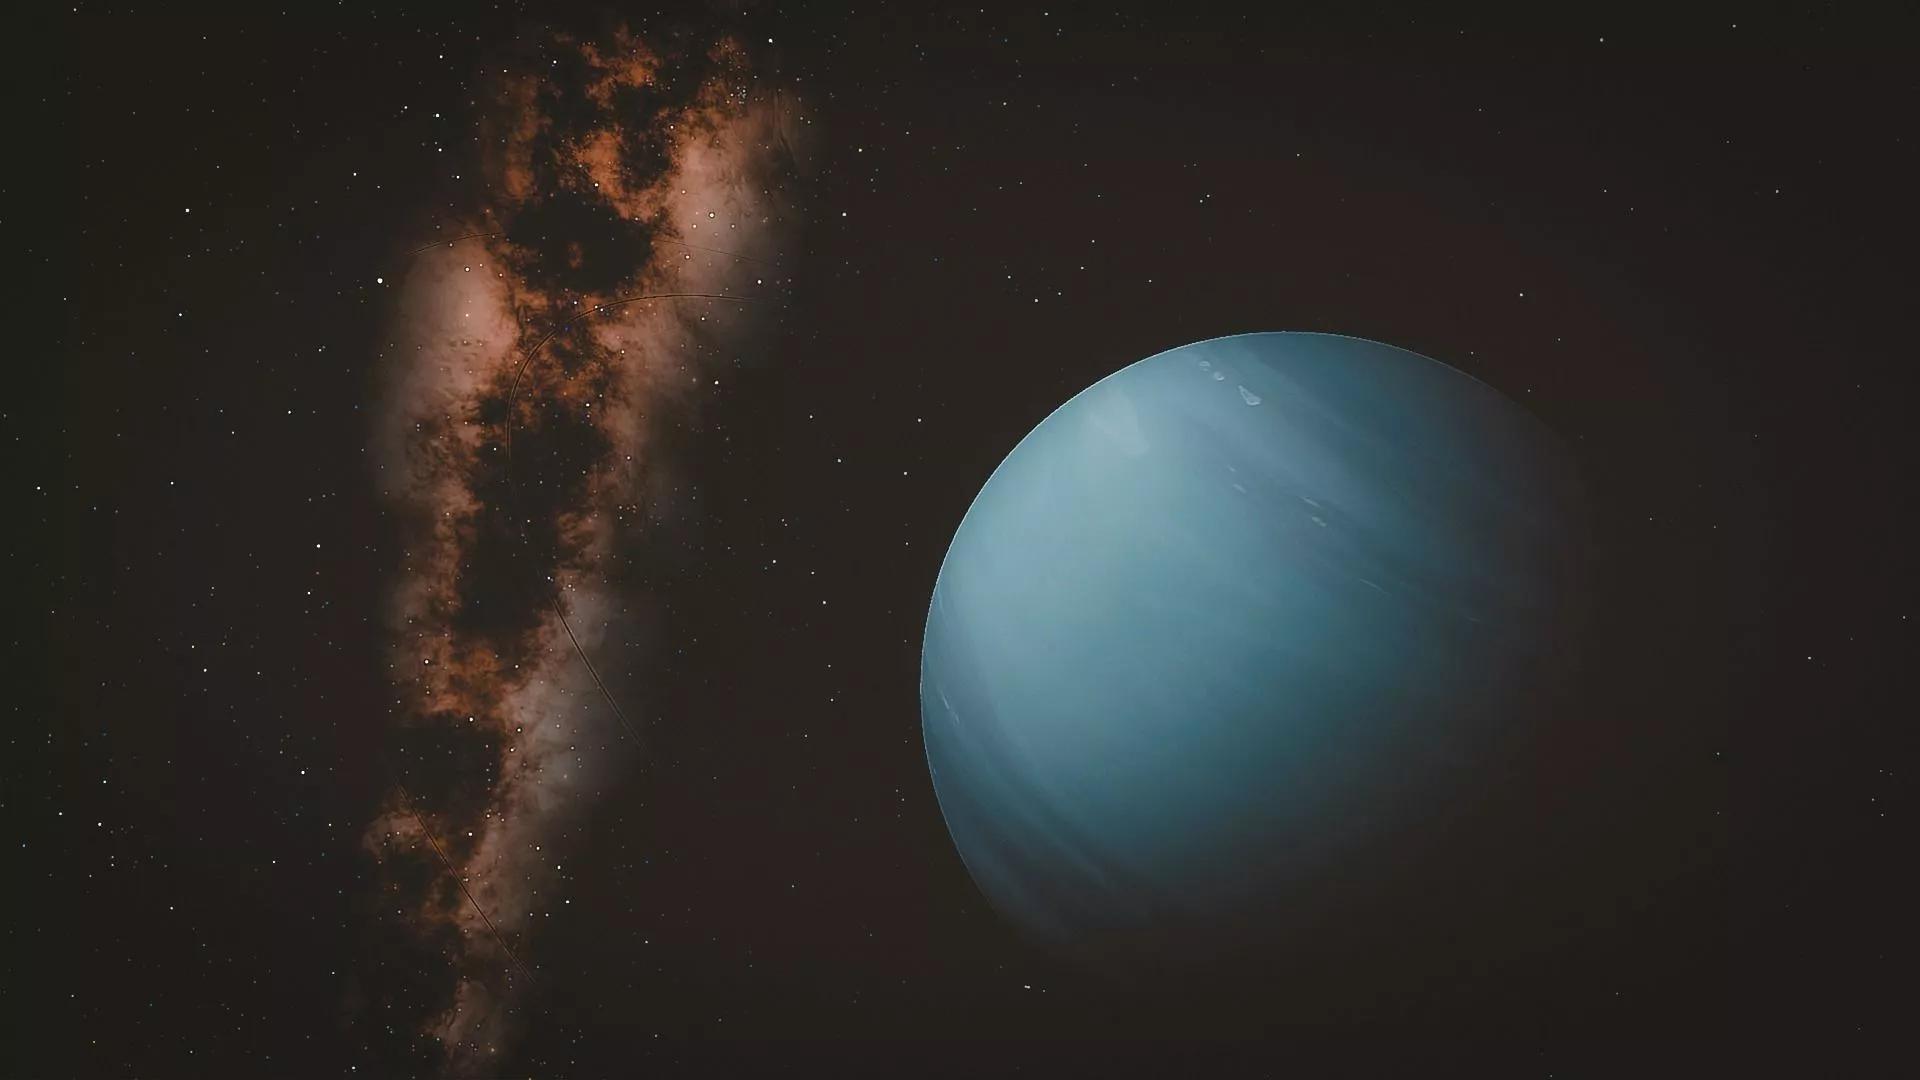 Scientists Detect 'Unexpected' Mid-Summer Cooling on Distant Neptune Followed by Unexplained Warming